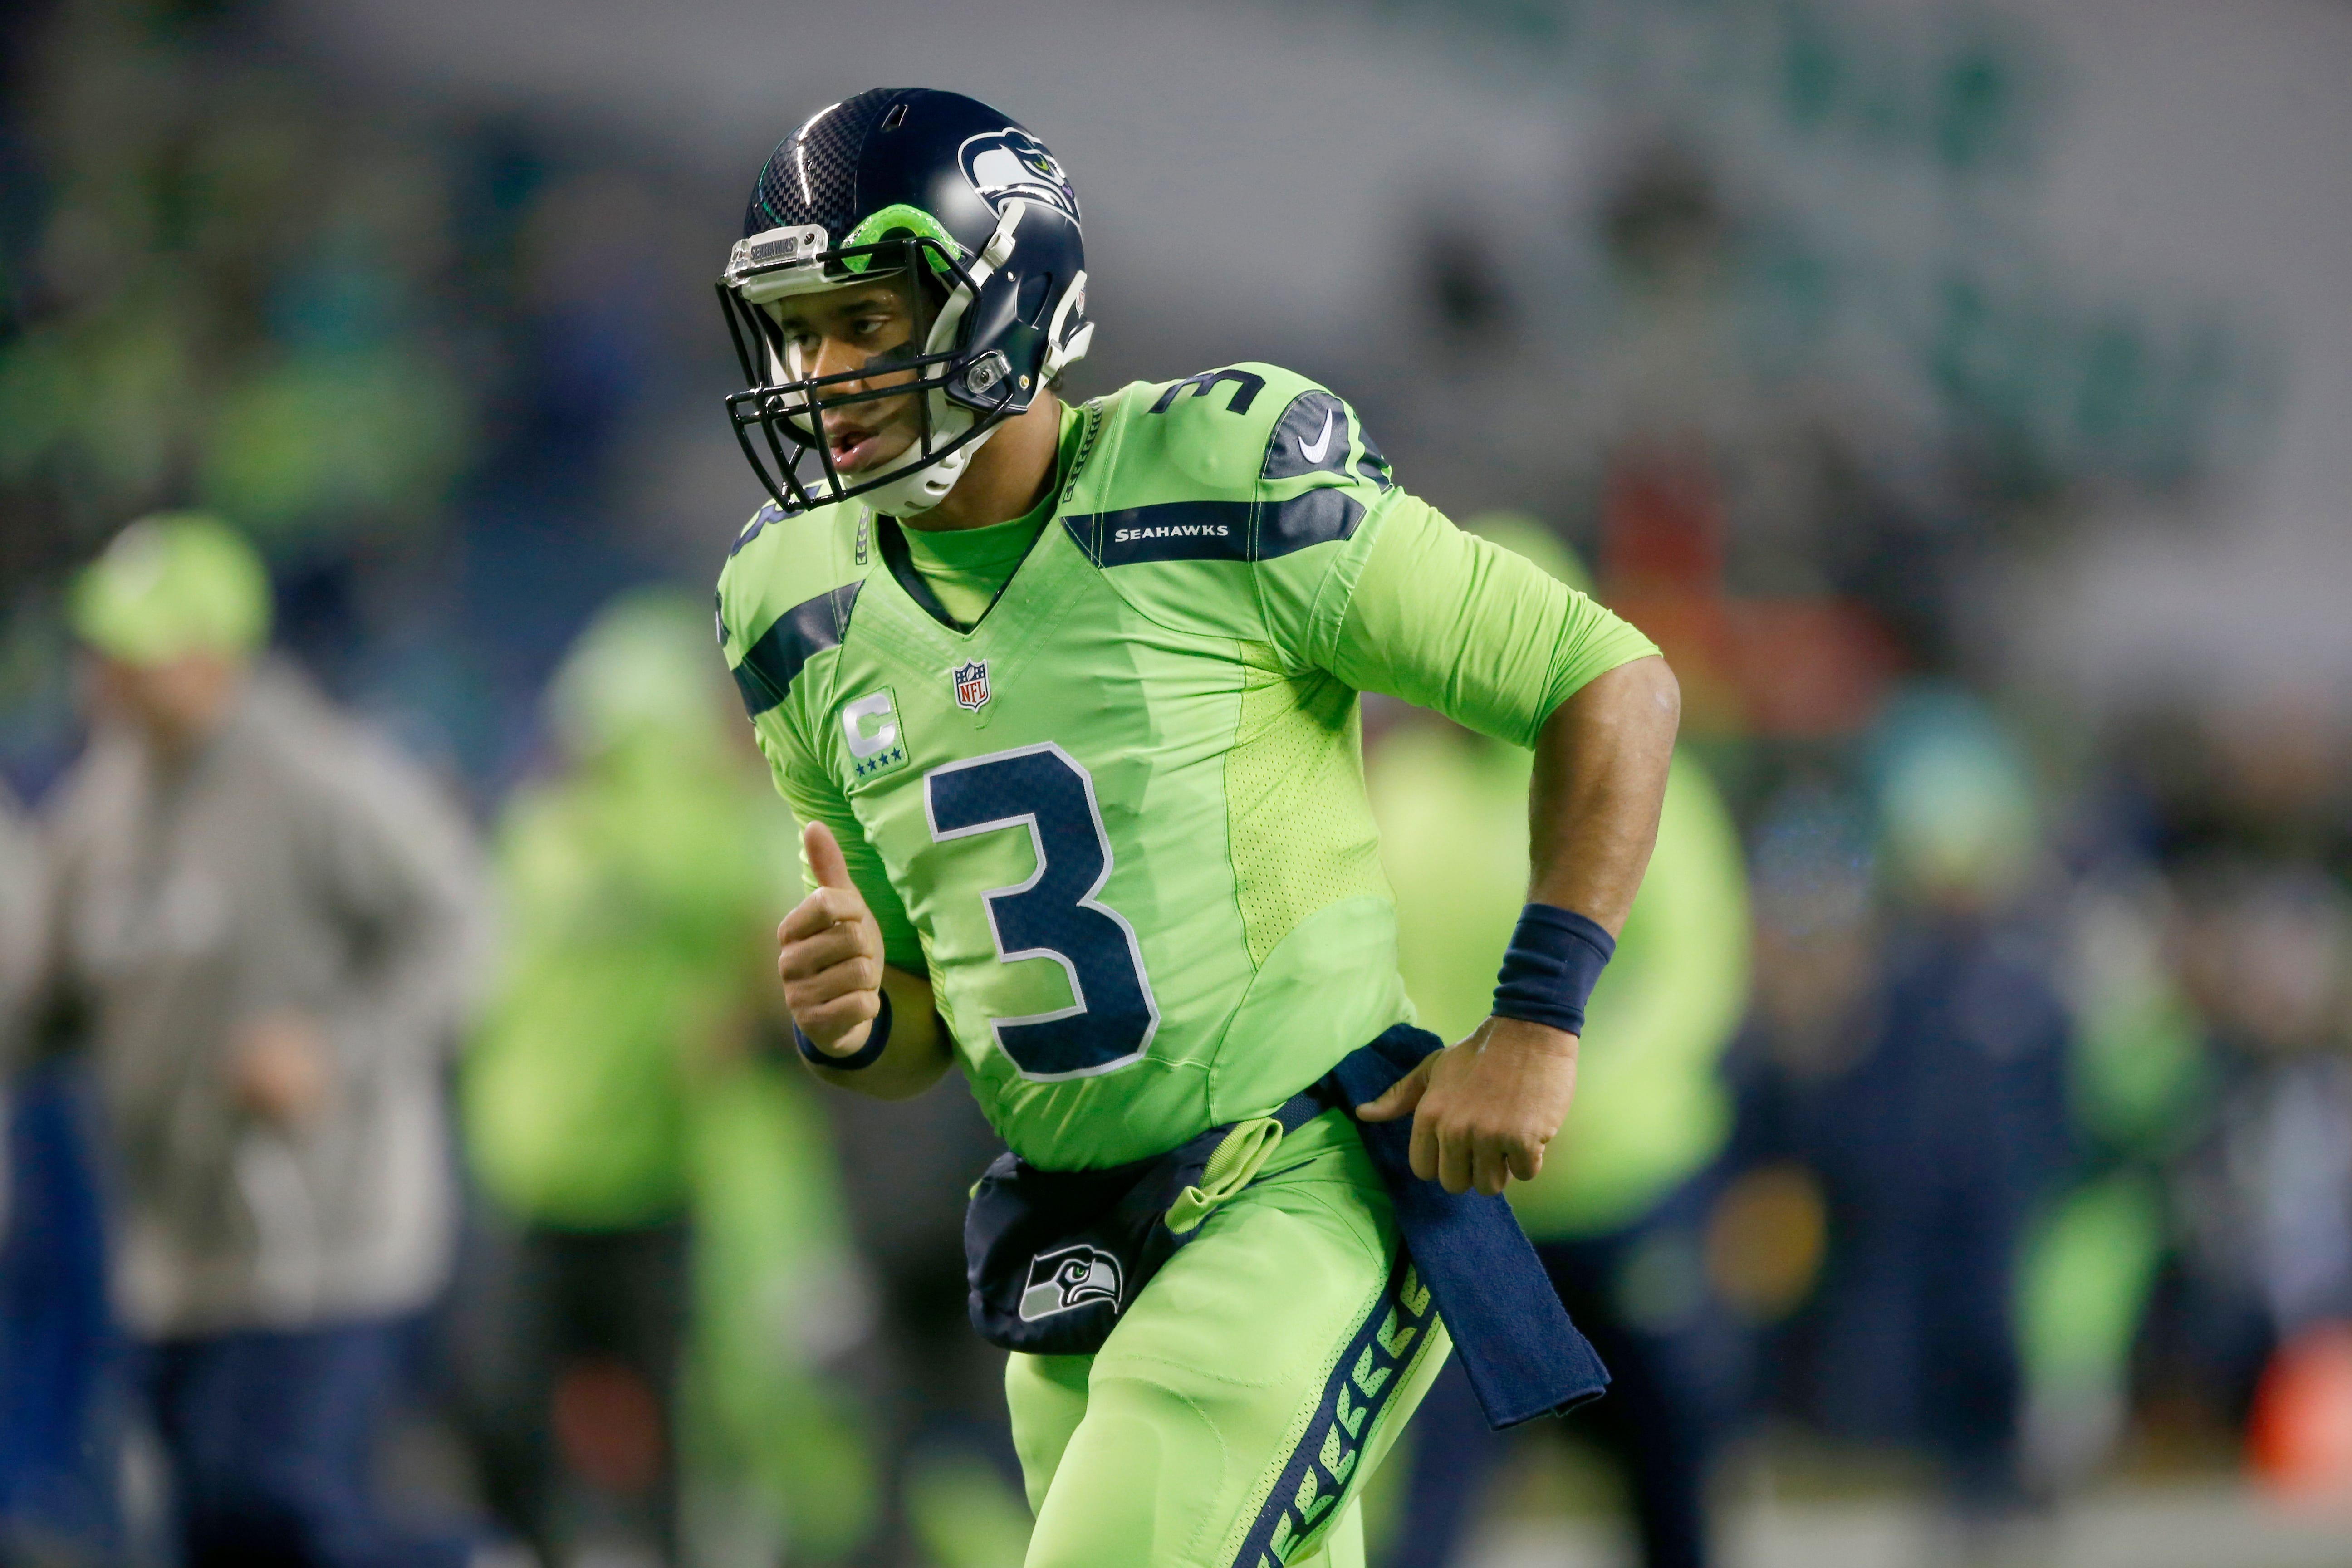 action green seahawks jersey